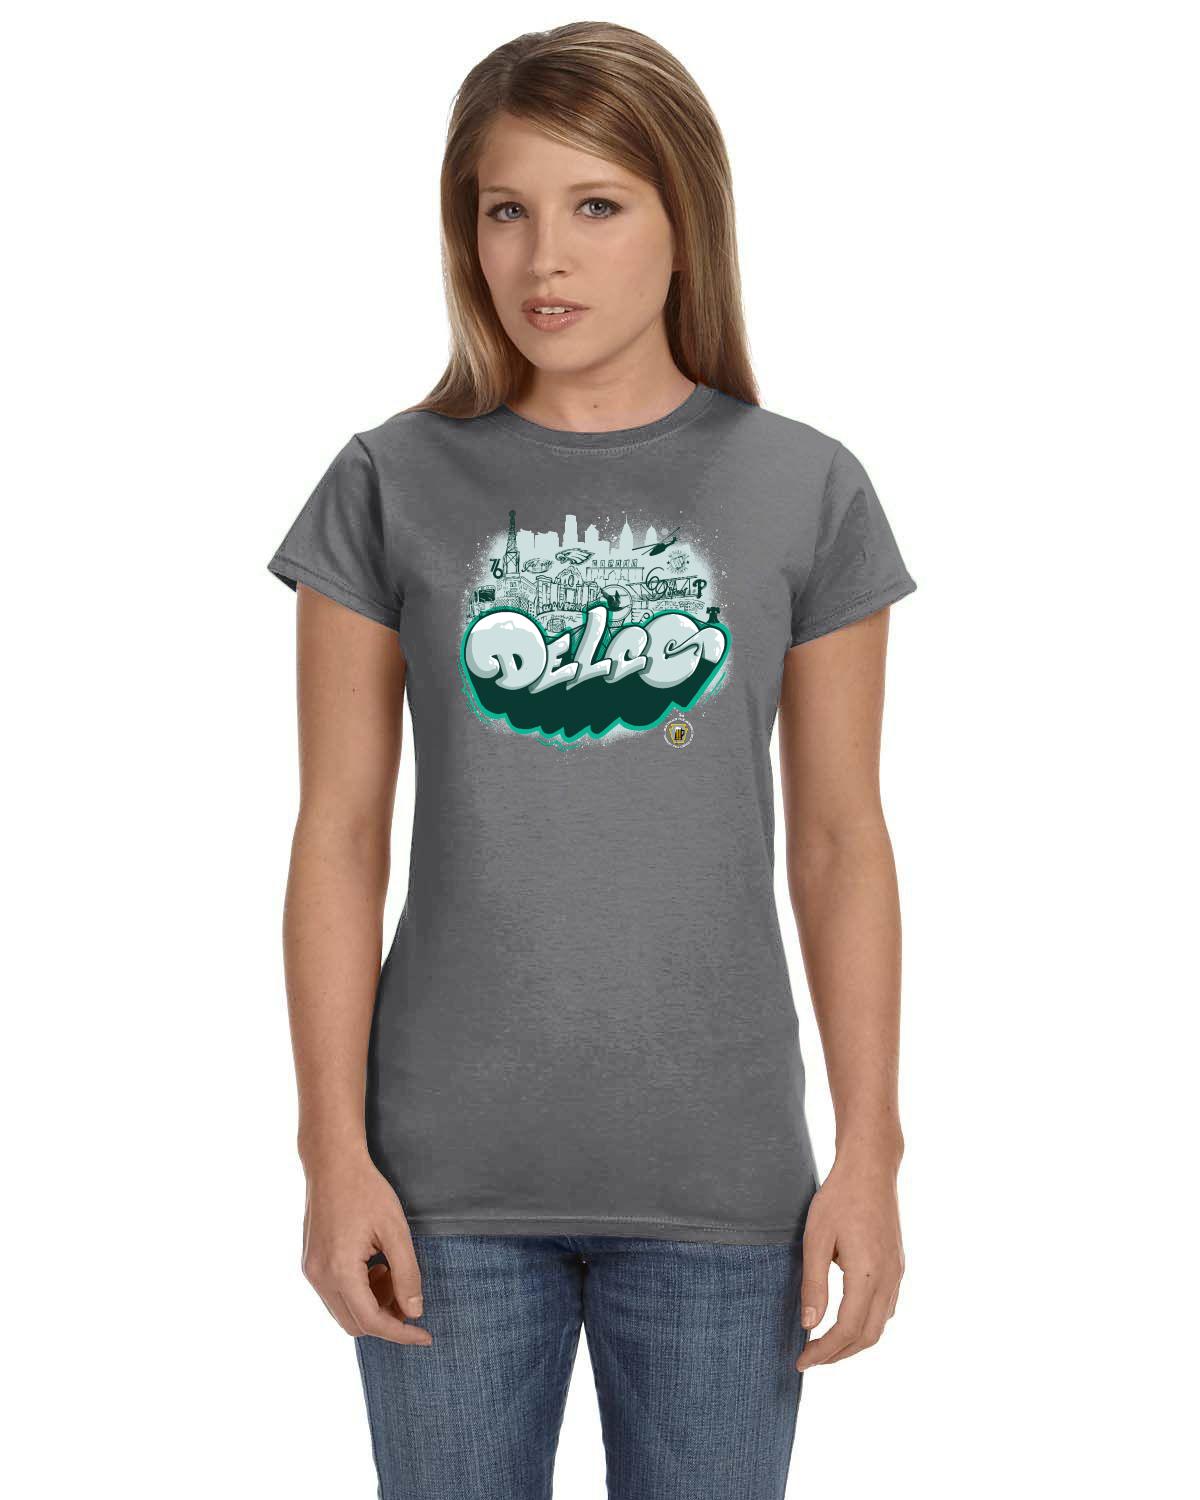 Delco Tailgate Tour Gildan Ladies' Softstyle 7.5 oz./lin. yd. Fitted T-Shirt | G640L